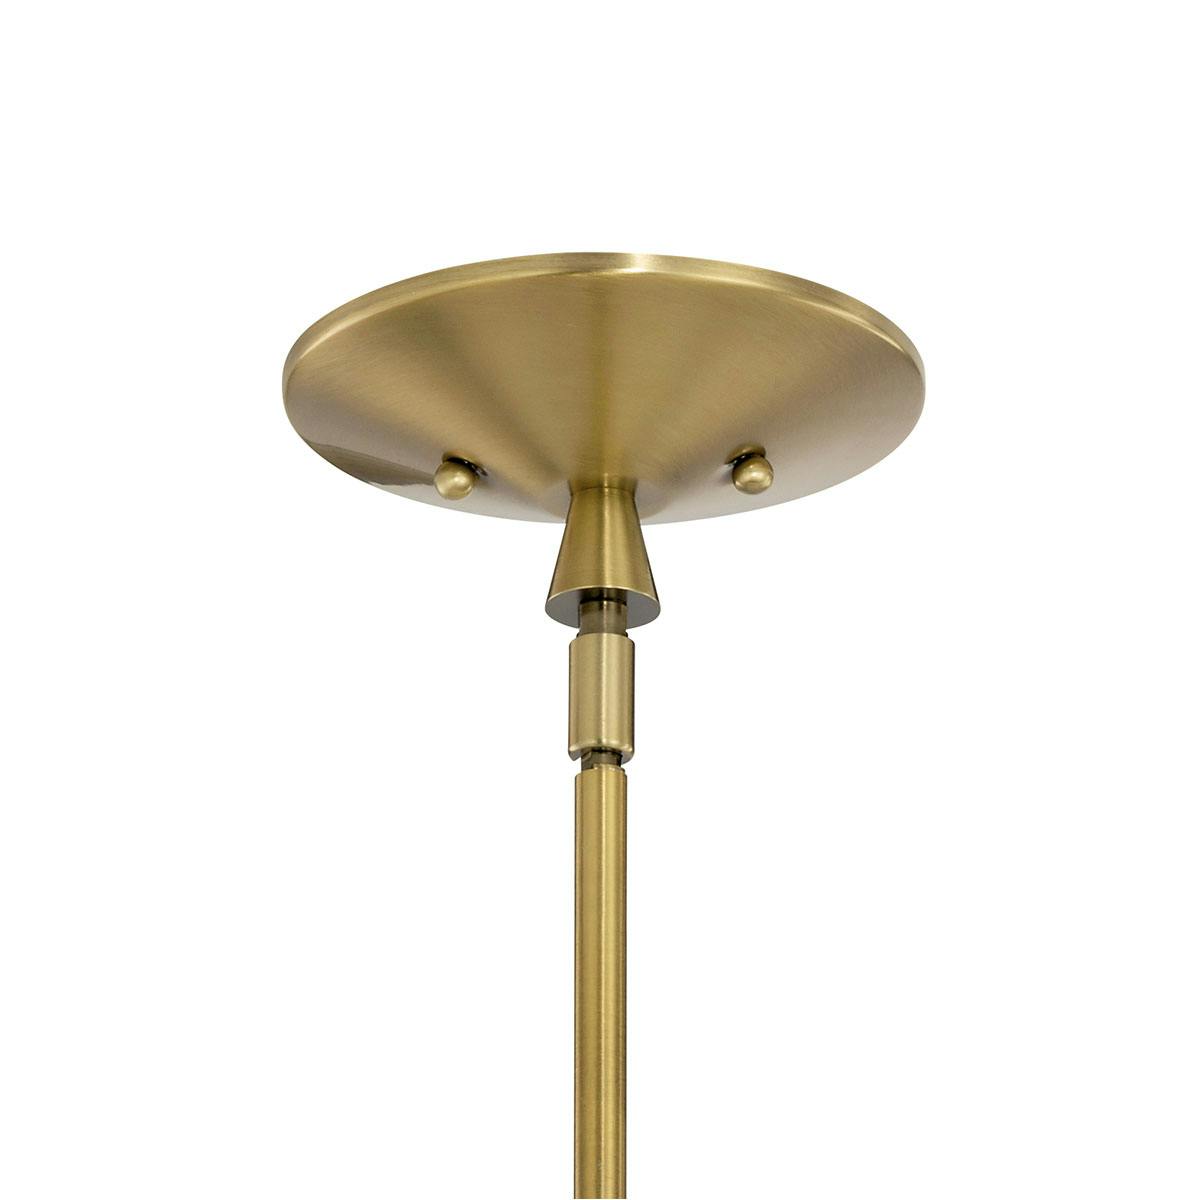 Canopy for the Torvee 6 Light Chandelier Brass on a white background